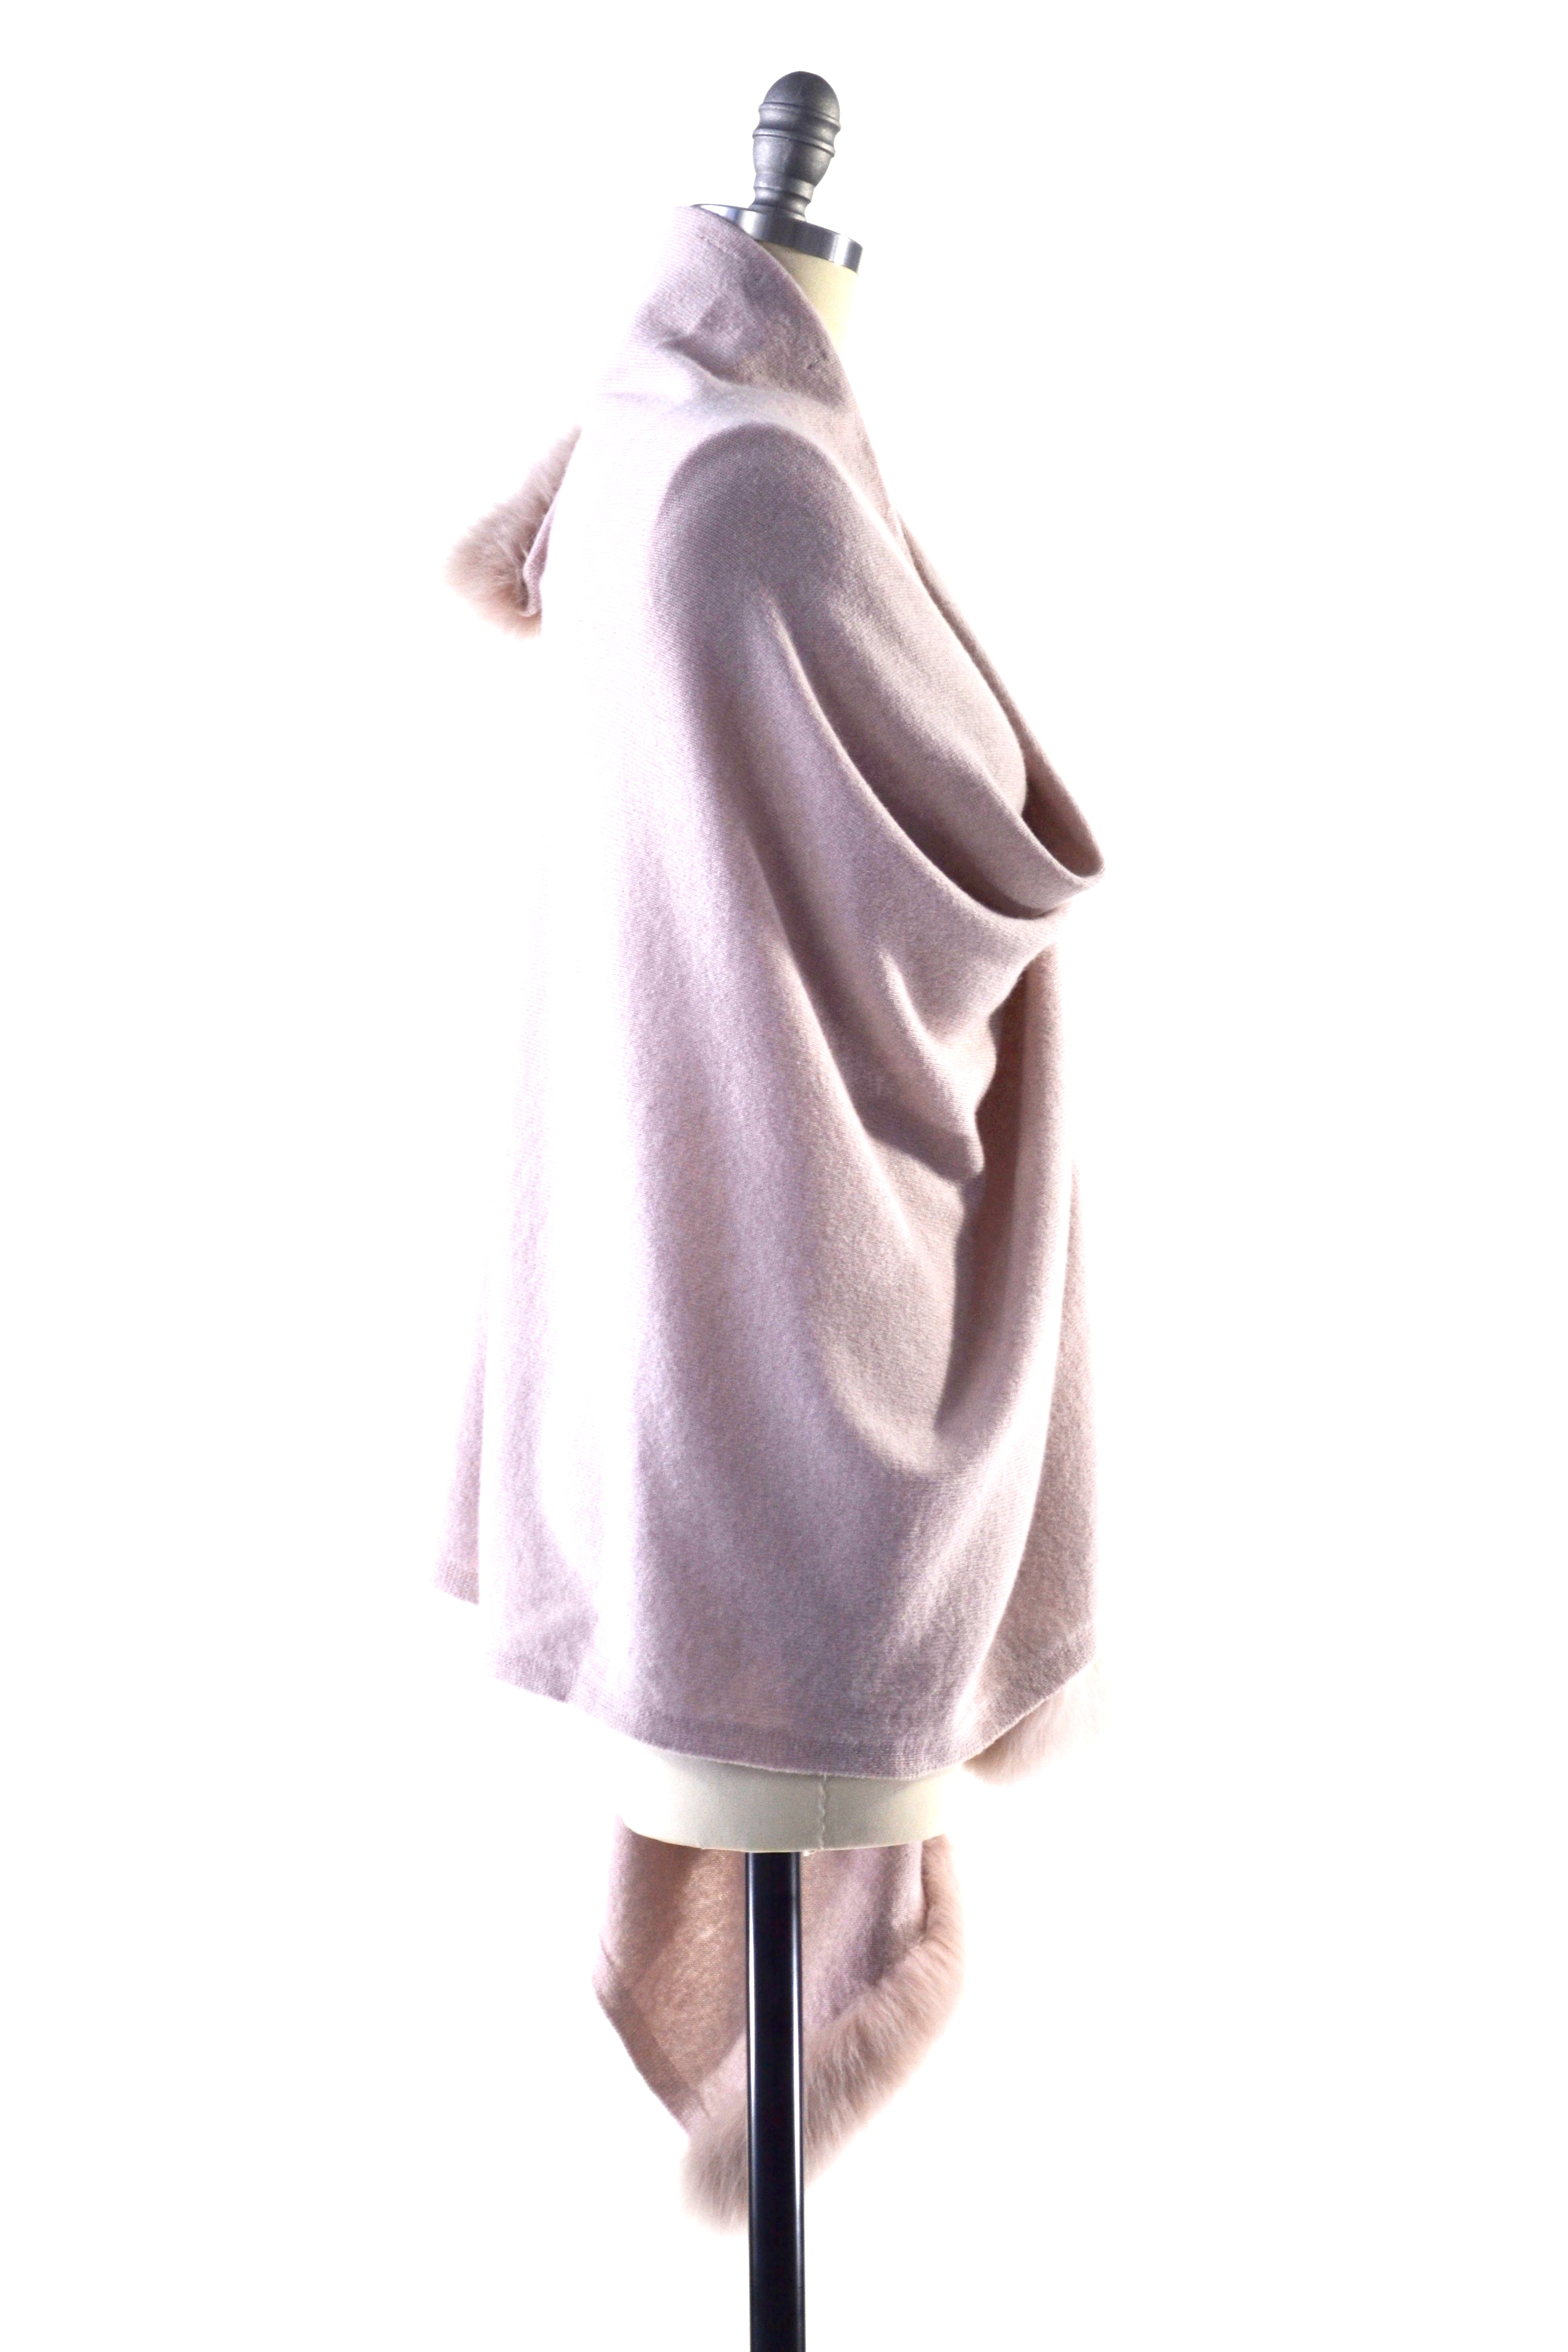 Cashmere Shawl with Double Fox Fur Trim in Blush